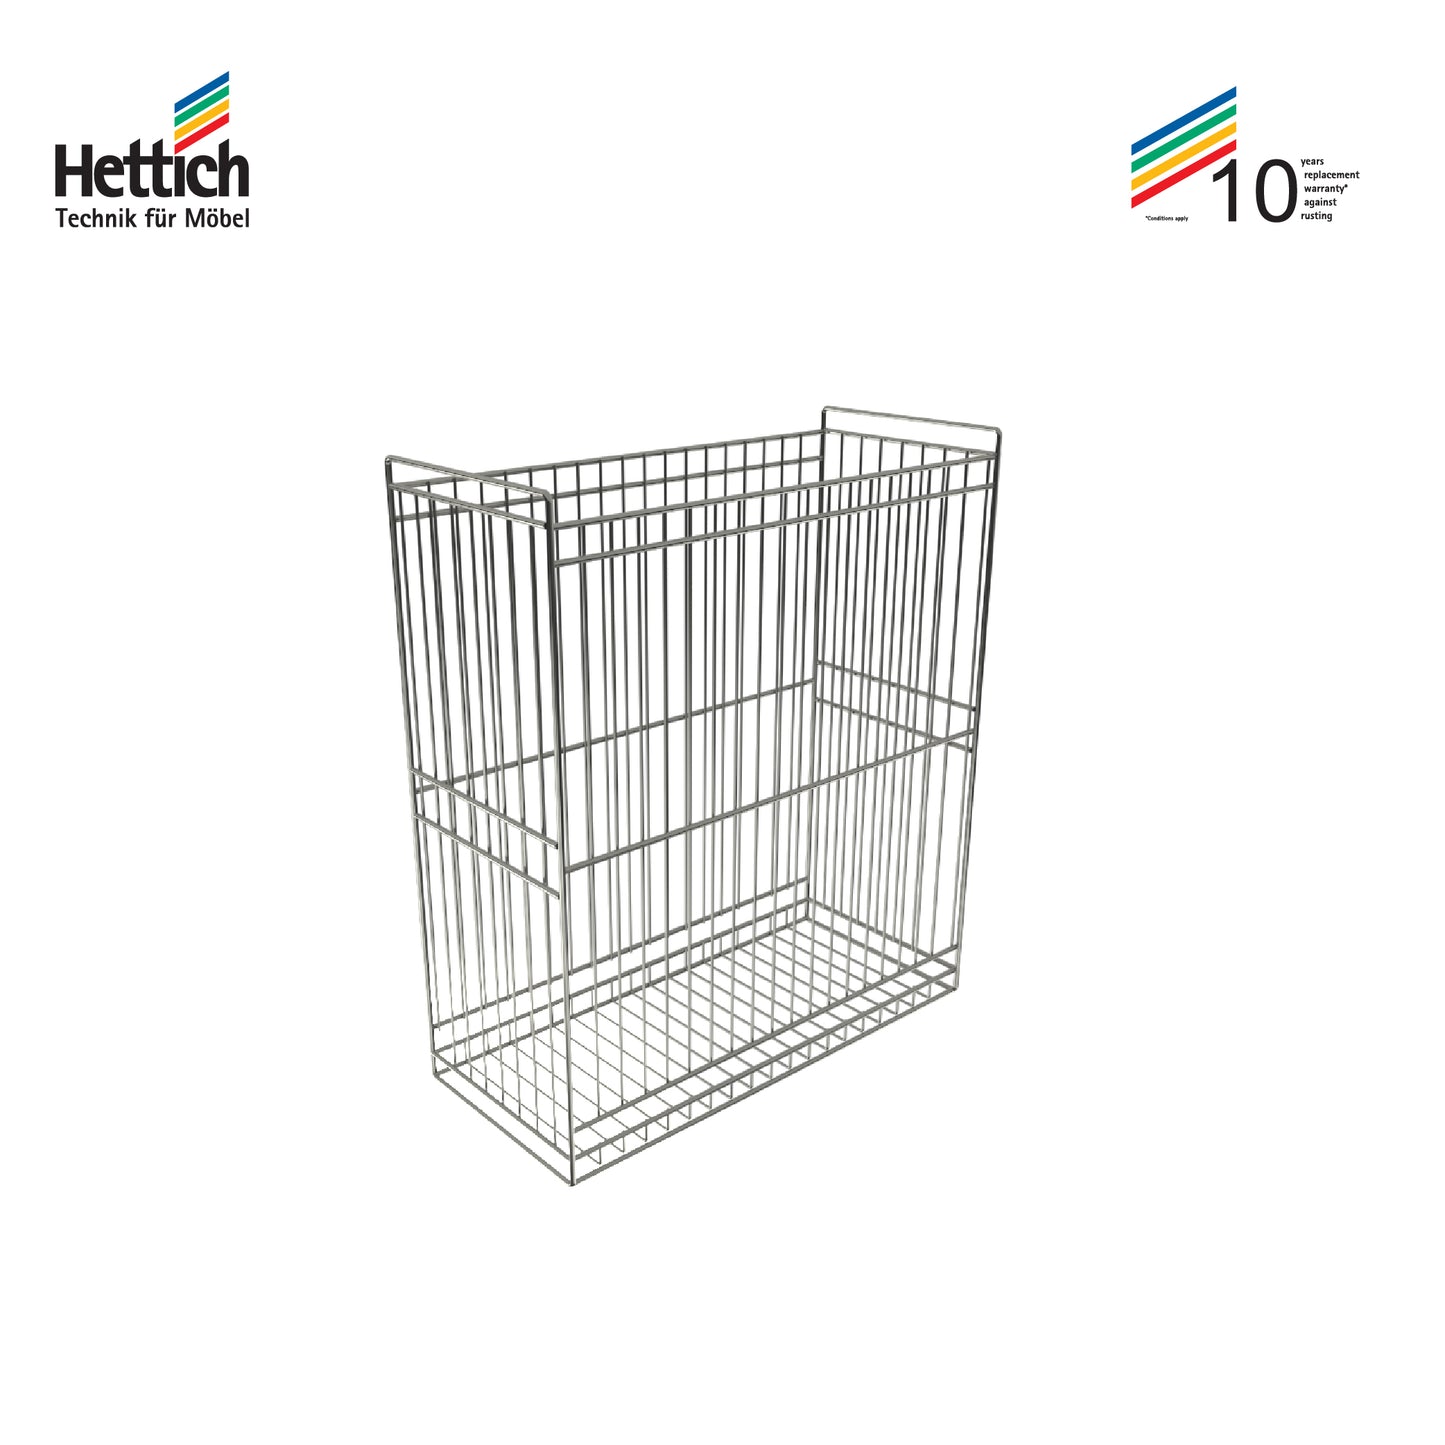 Hettich Cargo Laundry Basket, Size 500x580x220mm, Chrome Plated Stainless Steel - HT924101200